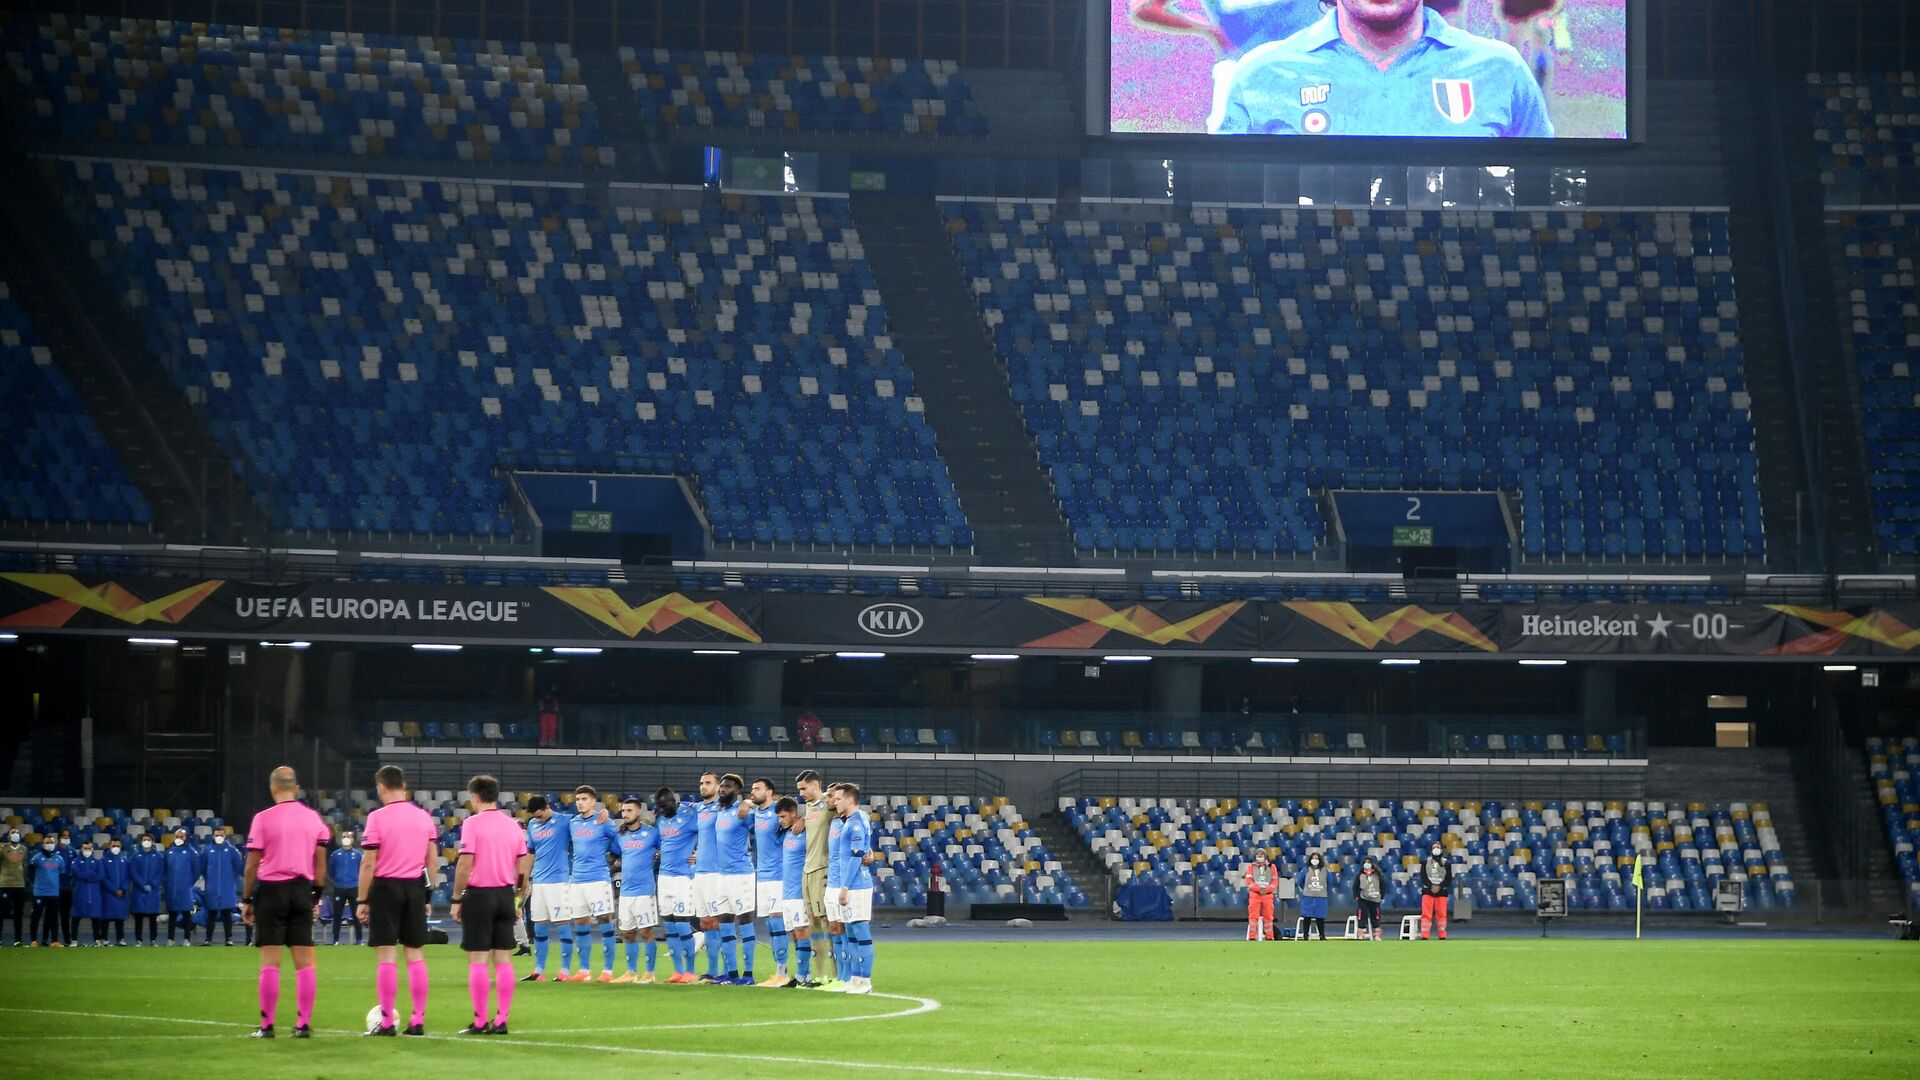 A screen displays a photo of late Argentinian football legend Diego Maradona as players hold a minute of silence in homage to Maradona prior to the UEFA Europe League Group F football match Napoli vs Rijeka on November 26, 2020 at the San Paolo stadium in Naples. - Maradona, widely remembered for his Hand of God goal against England in the 1986 World Cup quarter-finals, died on November 25, 2020 of a heart attack at his home near Buenos Aires in Argentina, while recovering from surgery to remove a blood clot on his brain. (Photo by Filippo MONTEFORTE / AFP) - РИА Новости, 1920, 26.11.2020